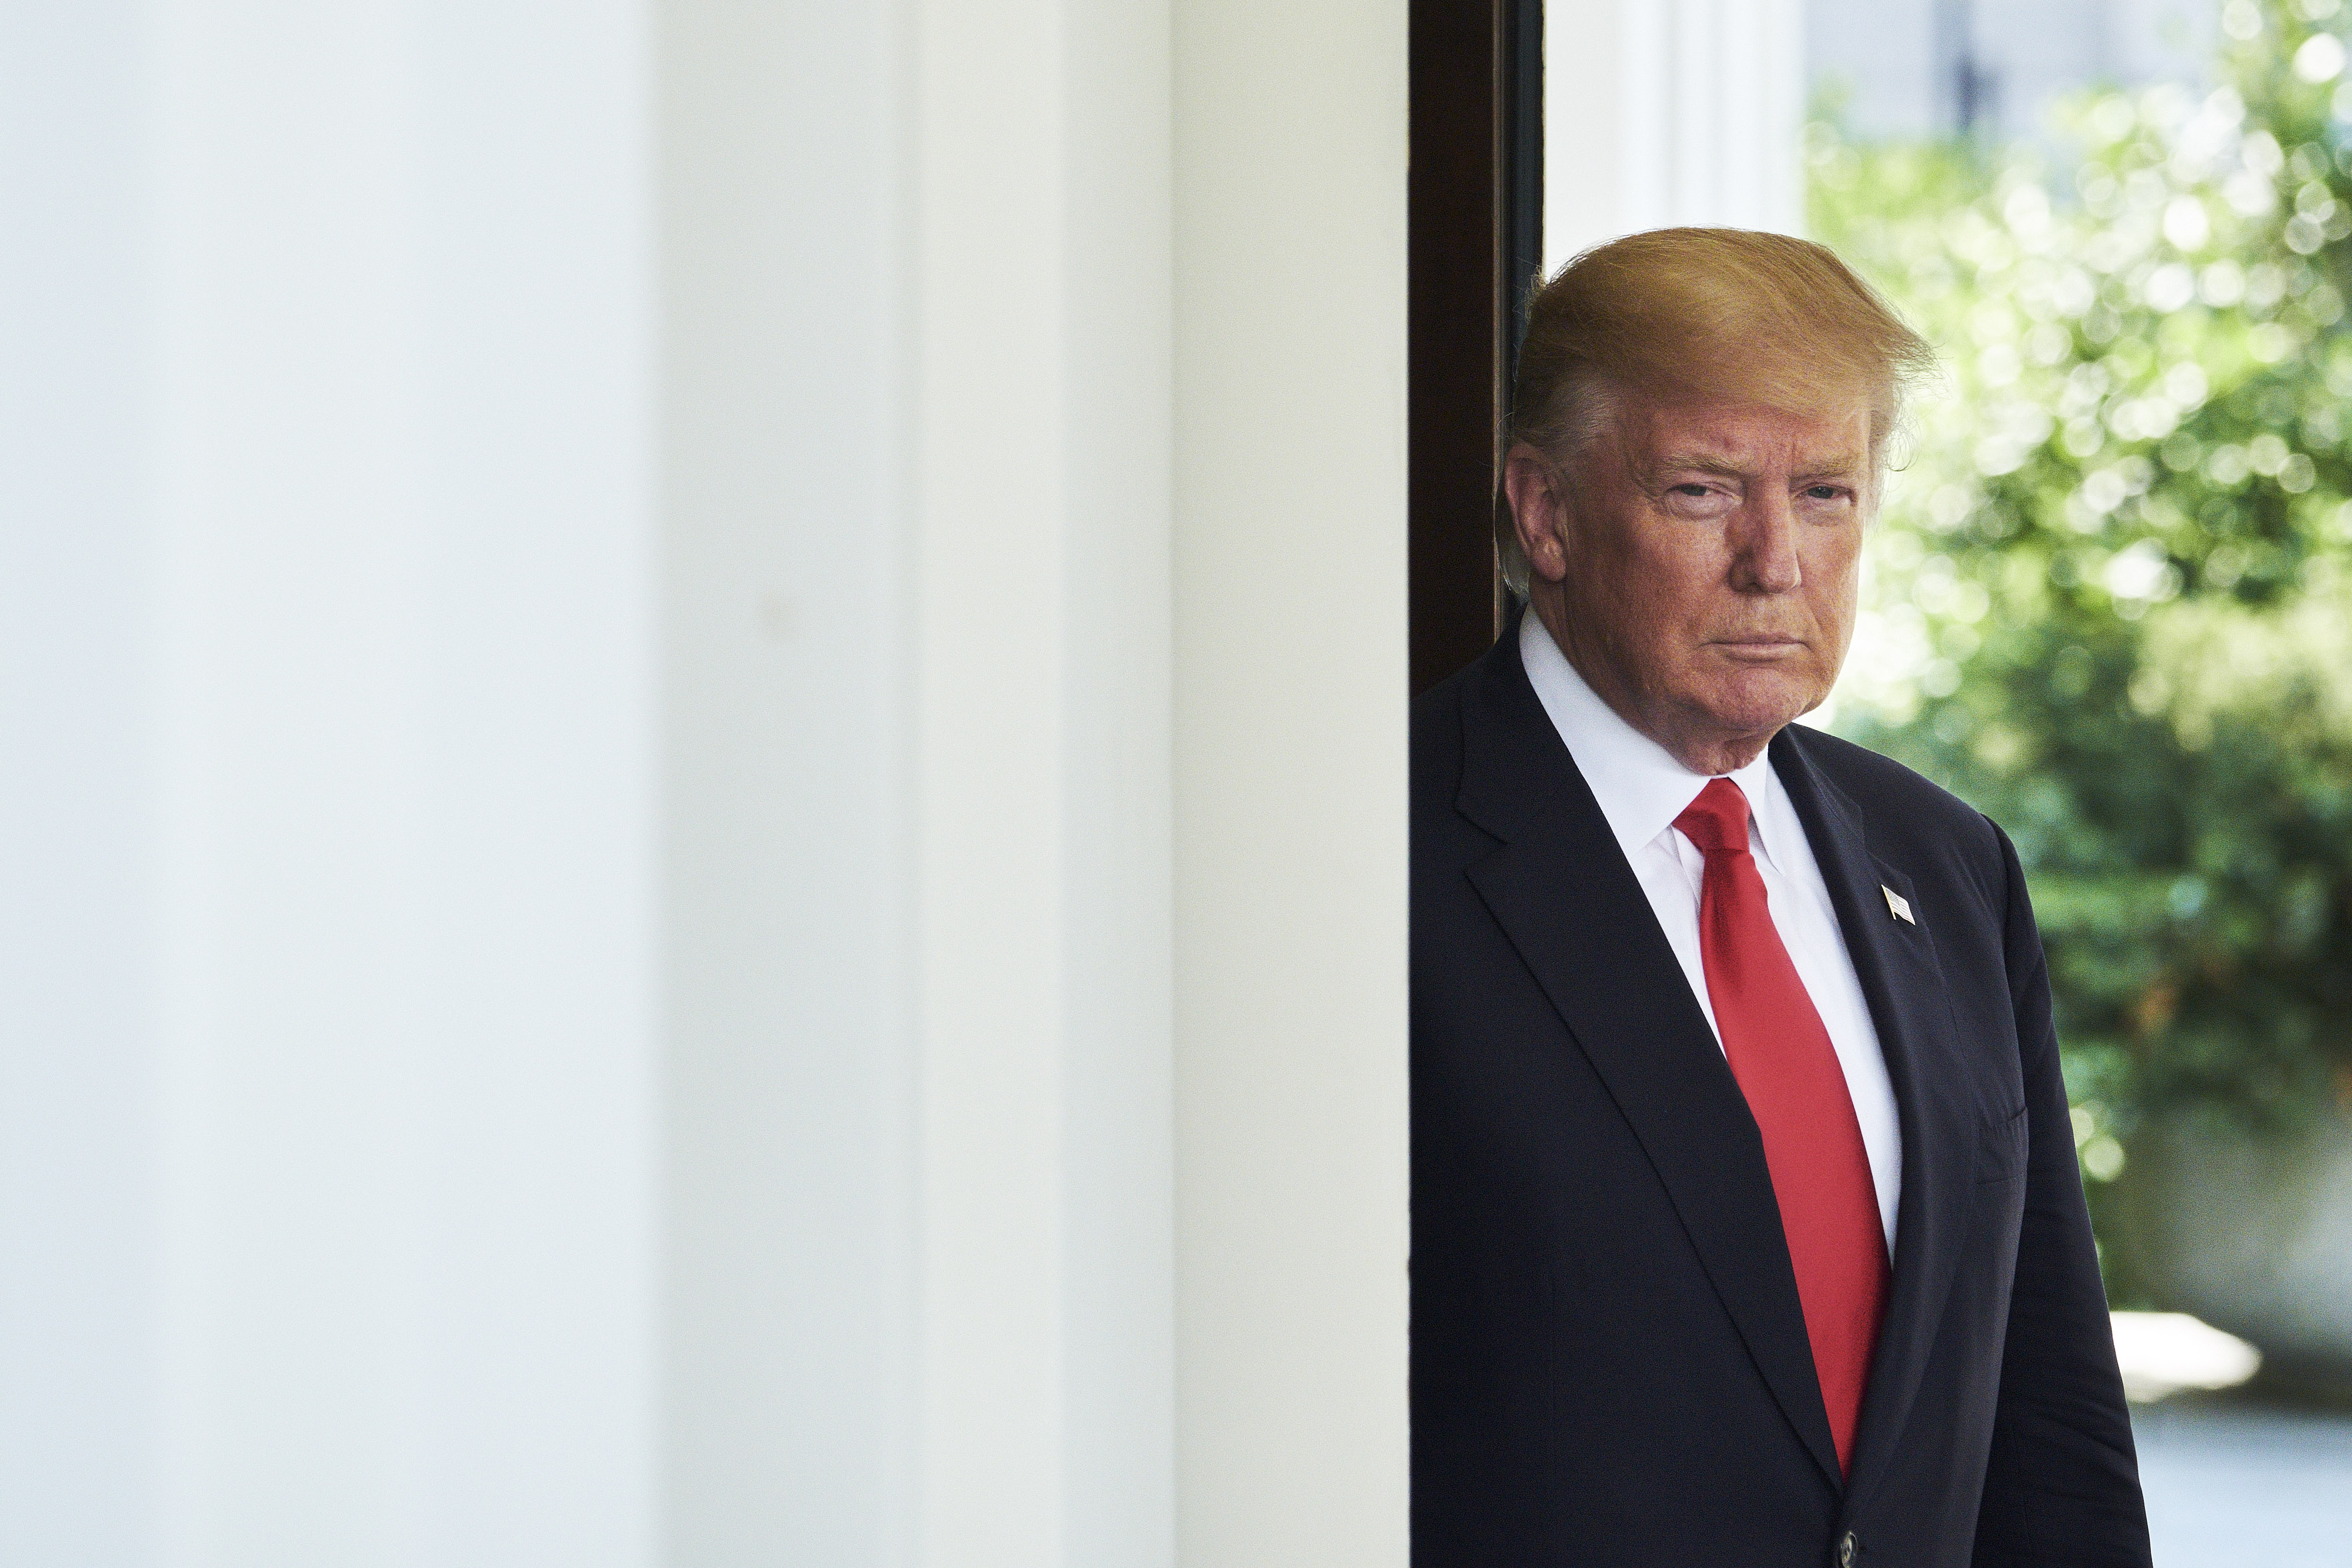 U.S. President Donald Trump, waits to greet Vietnam Prime Minister Nguyen Xuan Phuc at the West Wing of the White House in Washington, D.C., on May 31, 2017. (T.J. Kirkpatrick&mdash;Bloomberg/Getty Images)